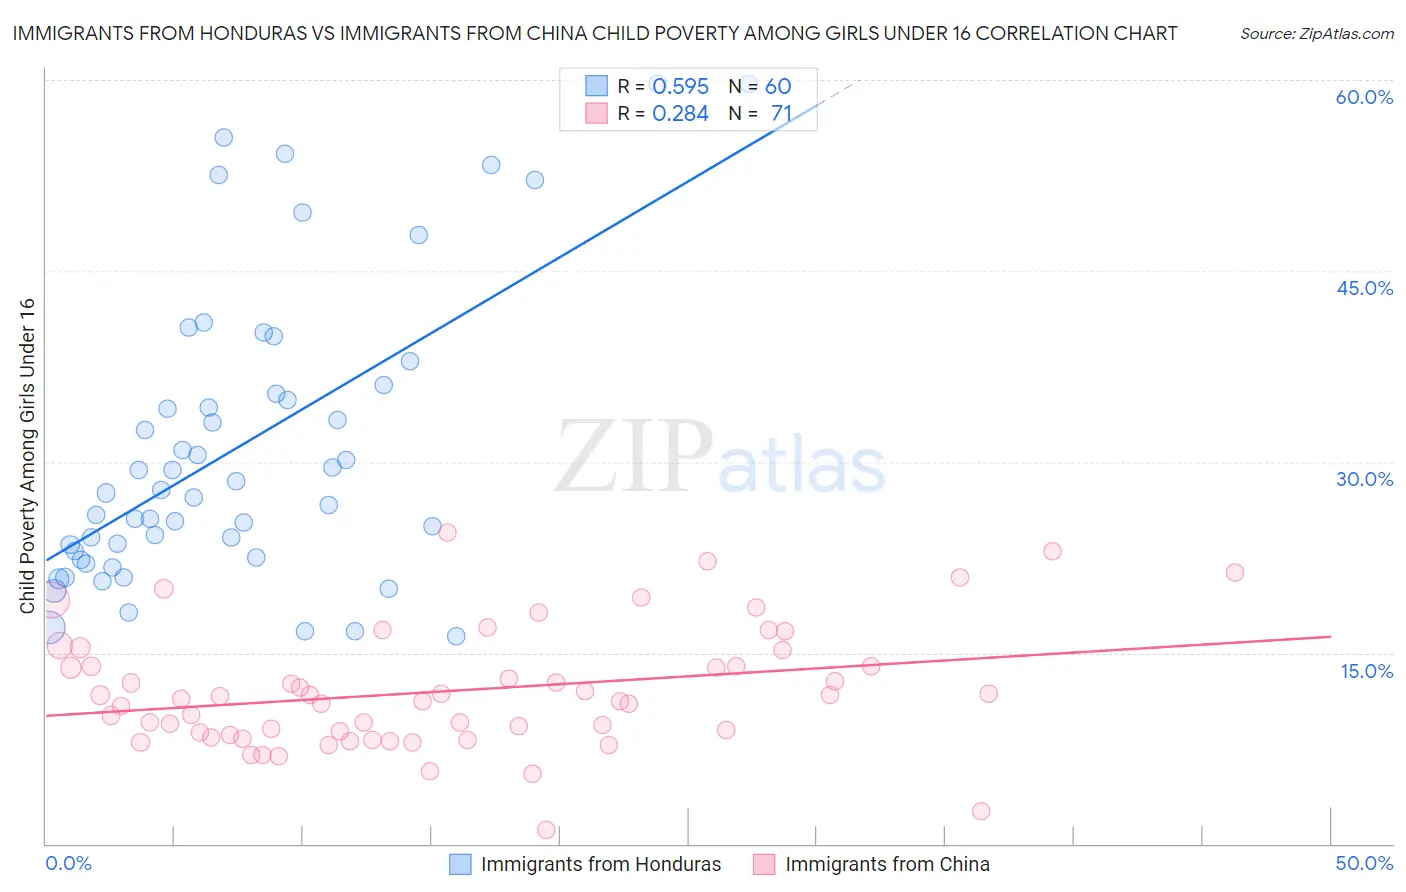 Immigrants from Honduras vs Immigrants from China Child Poverty Among Girls Under 16